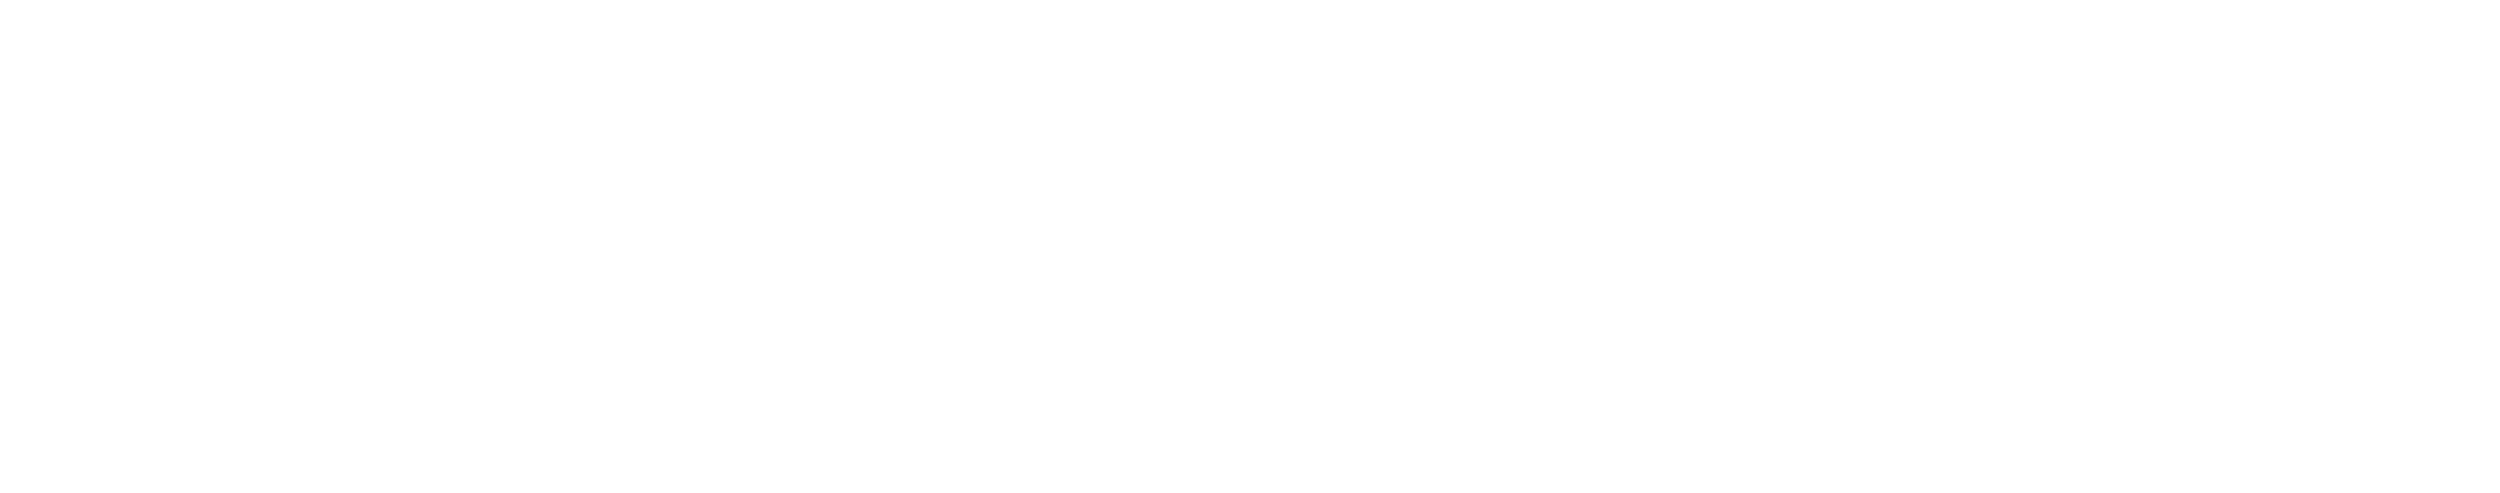 Moonwater Counselling